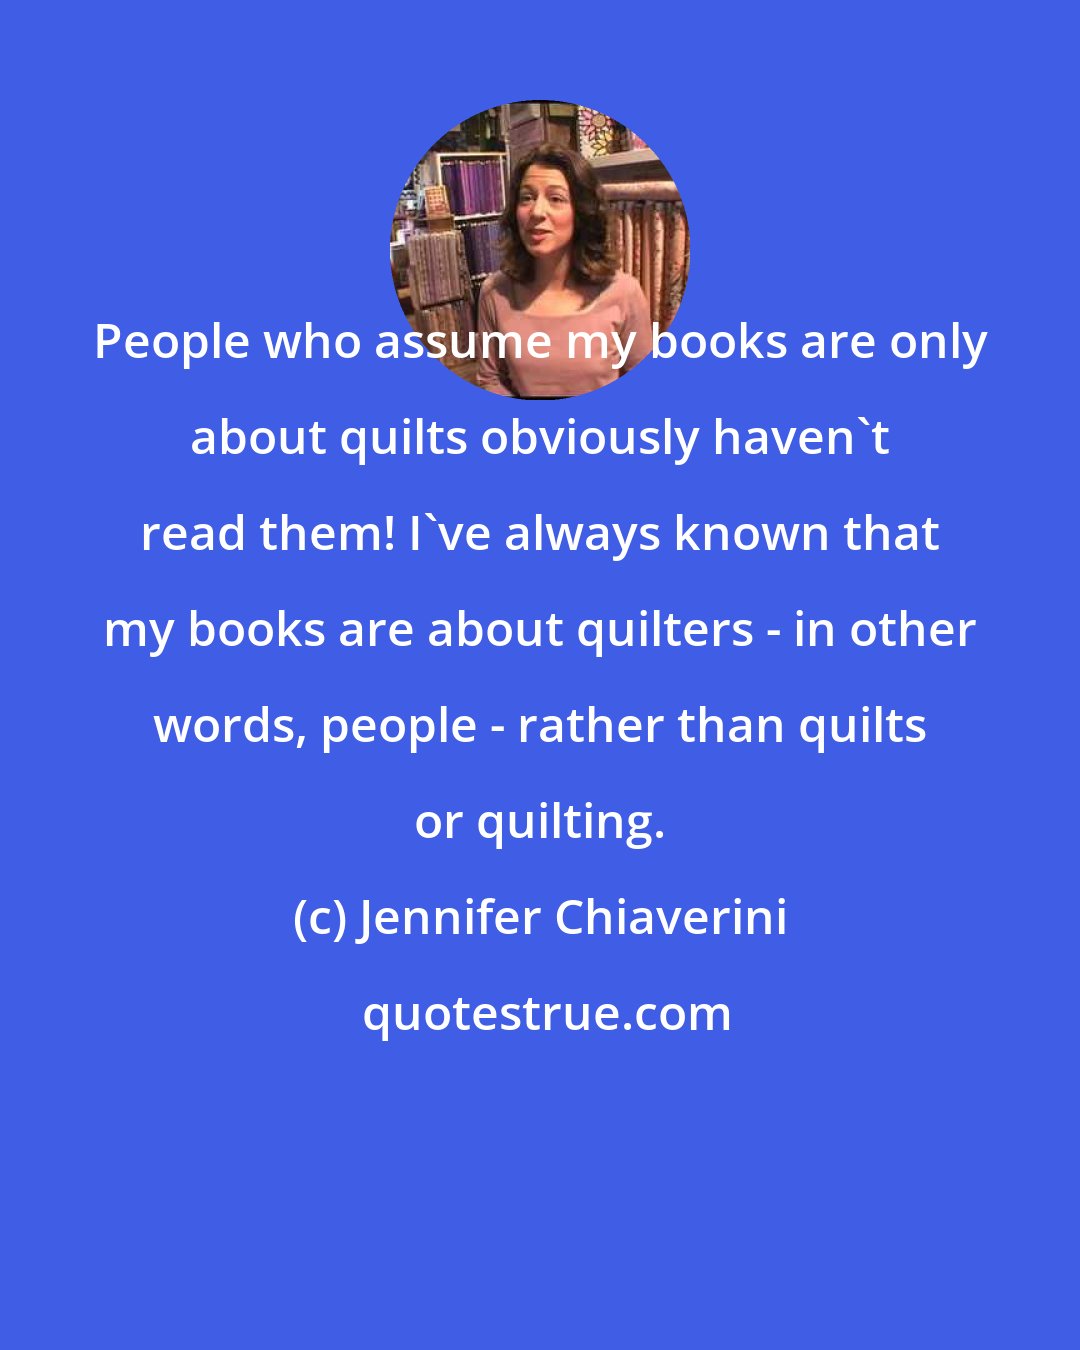 Jennifer Chiaverini: People who assume my books are only about quilts obviously haven't read them! I've always known that my books are about quilters - in other words, people - rather than quilts or quilting.